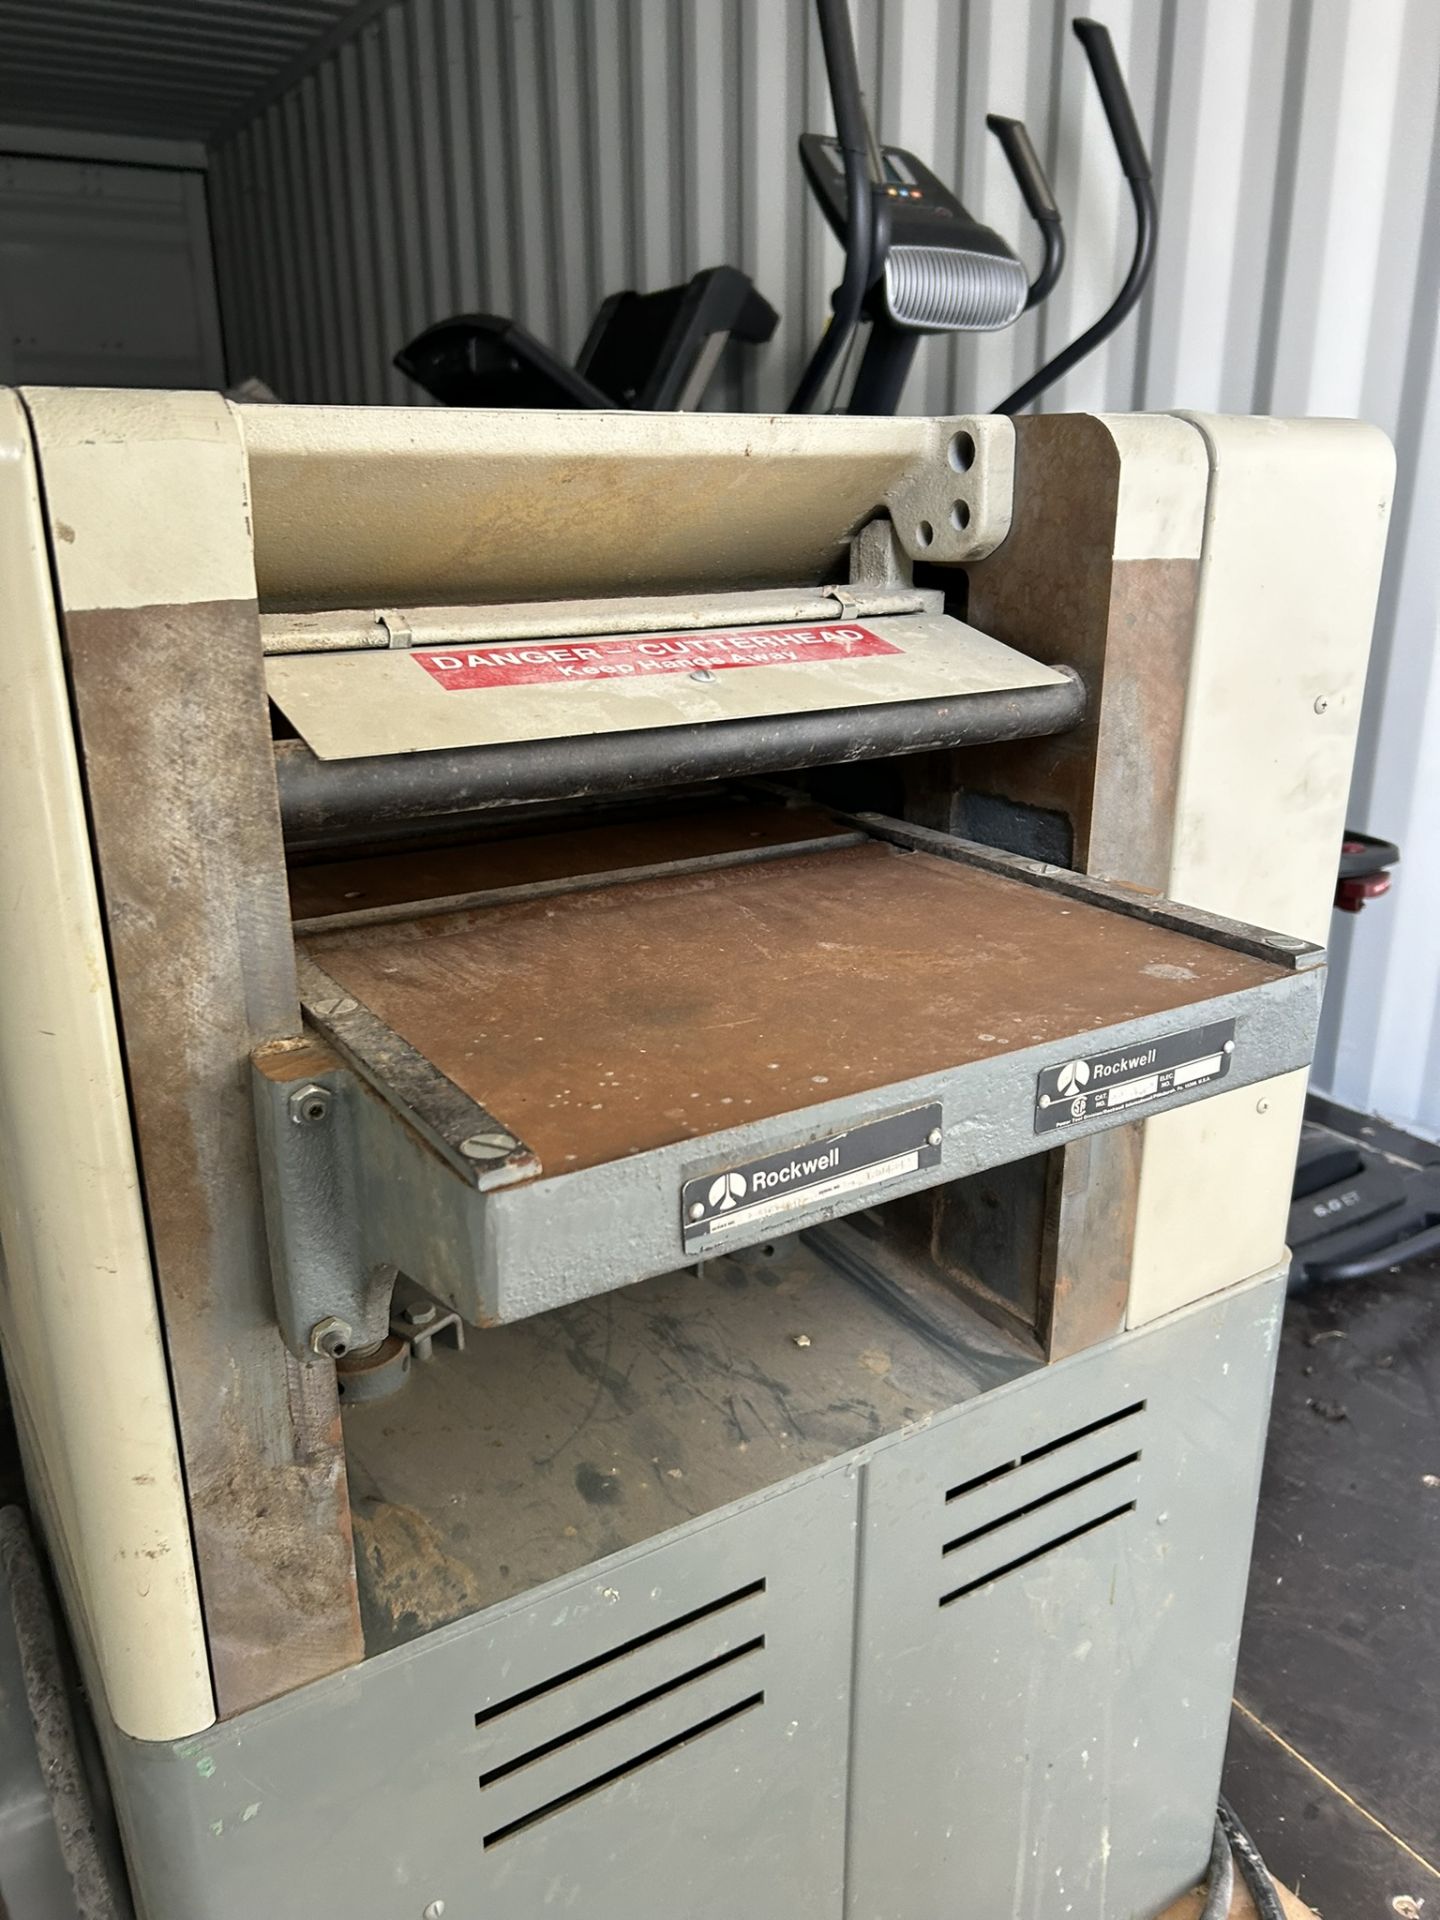 ROCKWELL 13" THICKNESS PLANER, 220V - Image 5 of 7